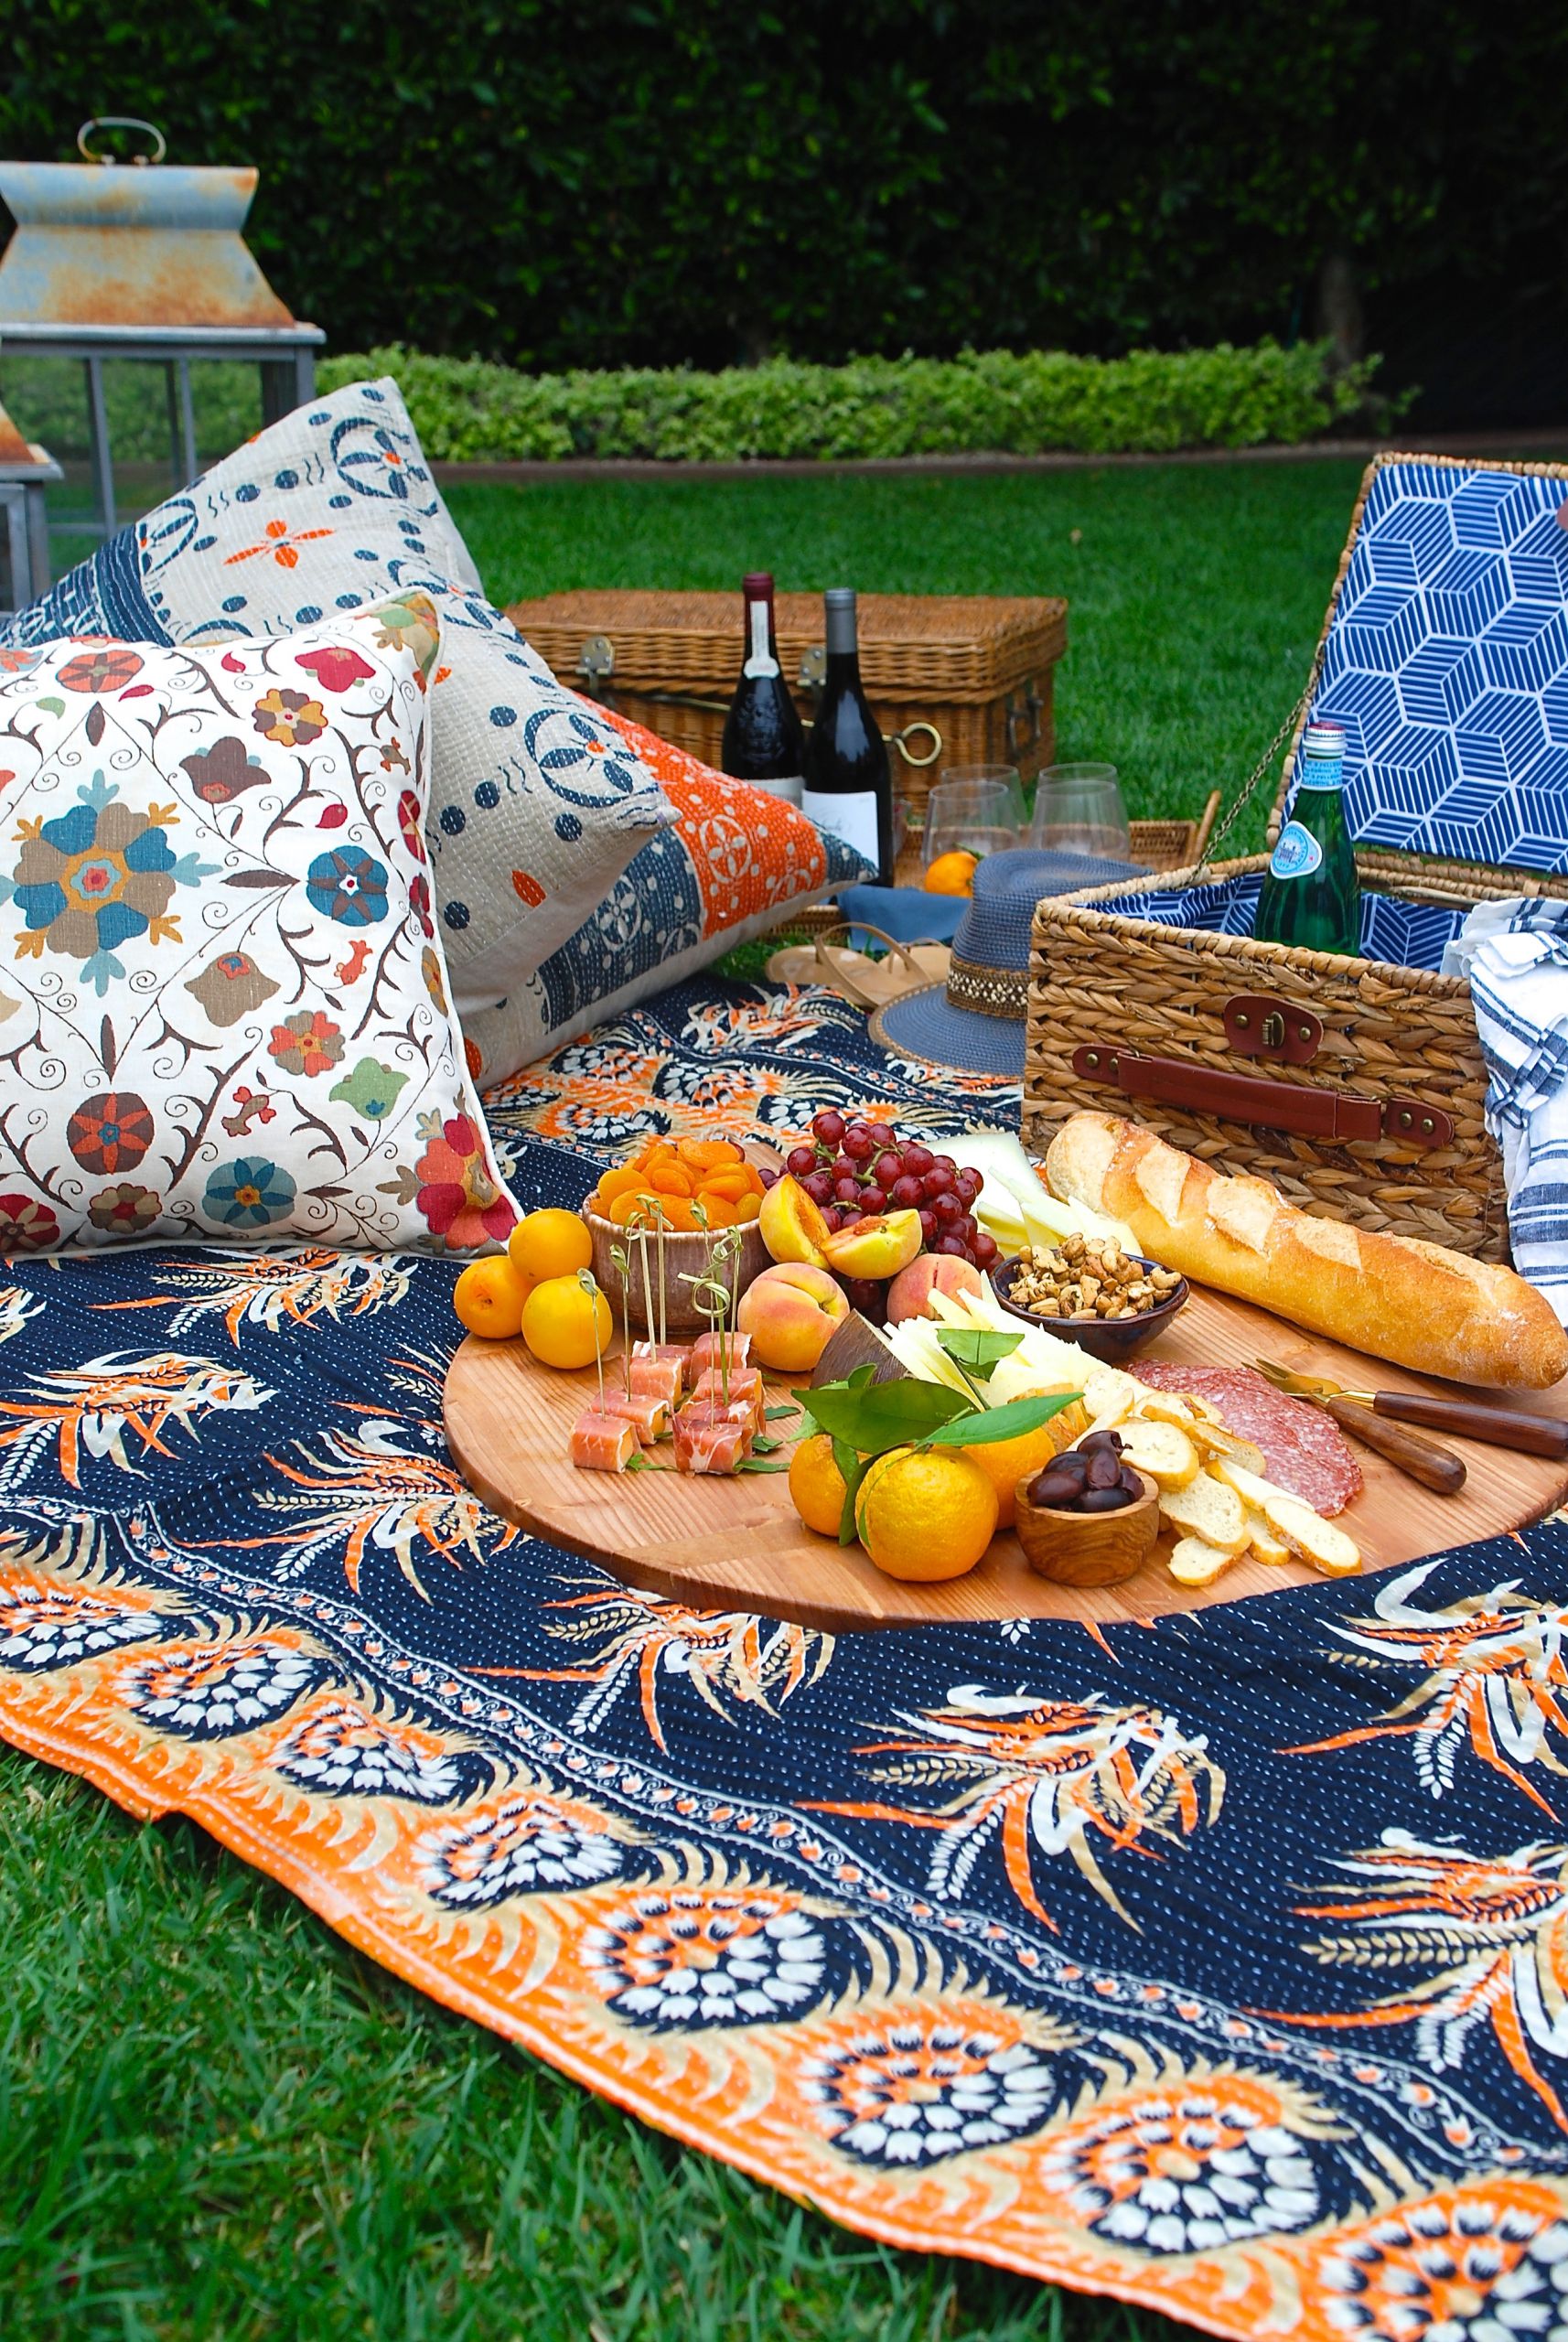 Backyard Picnic Party Ideas
 how to create a pretty picnic party